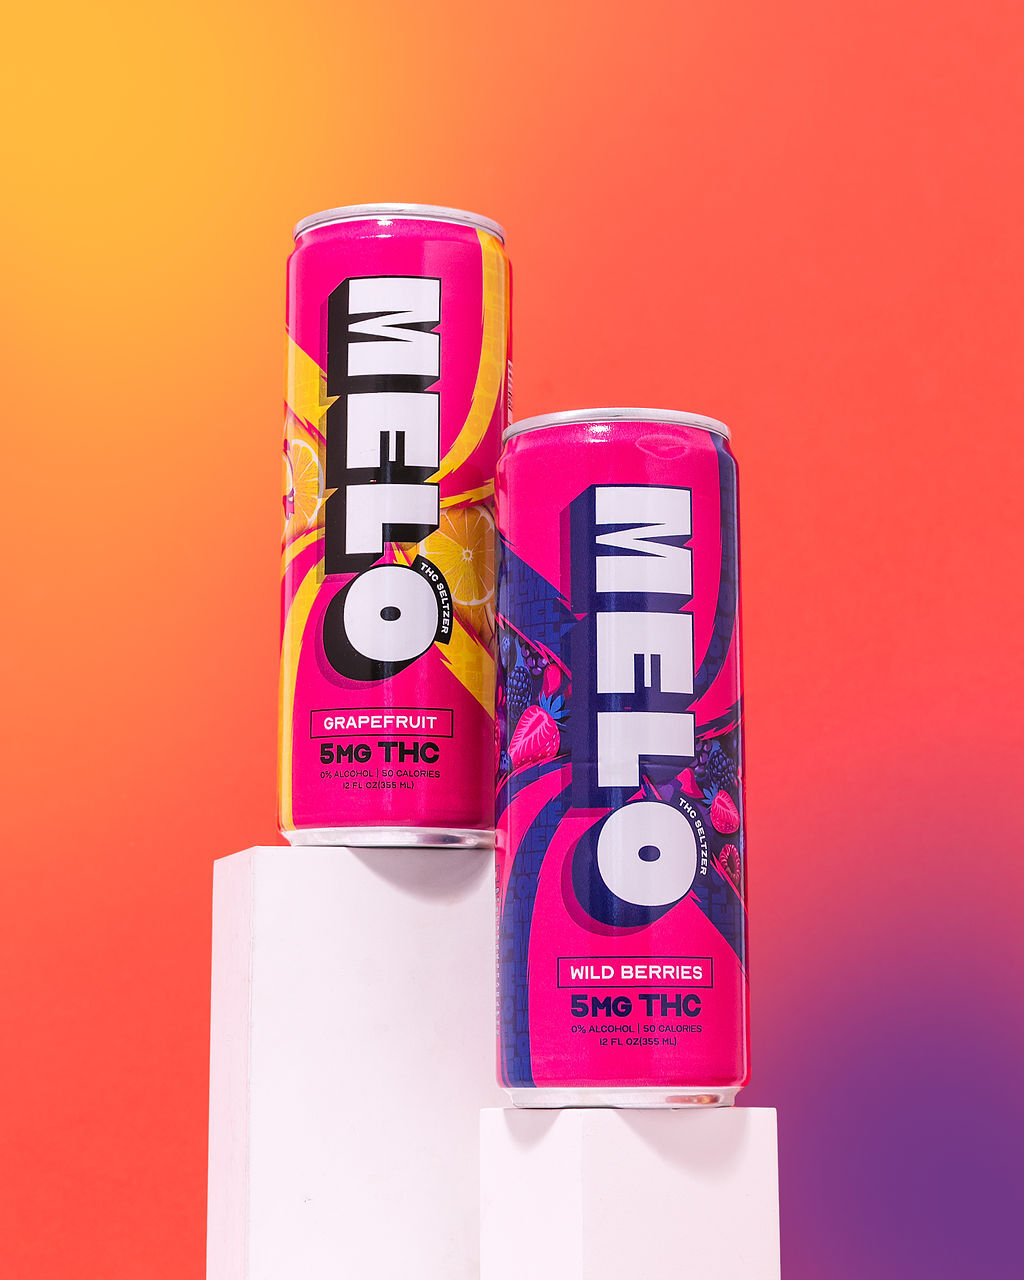 Fruity Fun and Elevated Vibes: Exploring Melo’s THC Beverages!